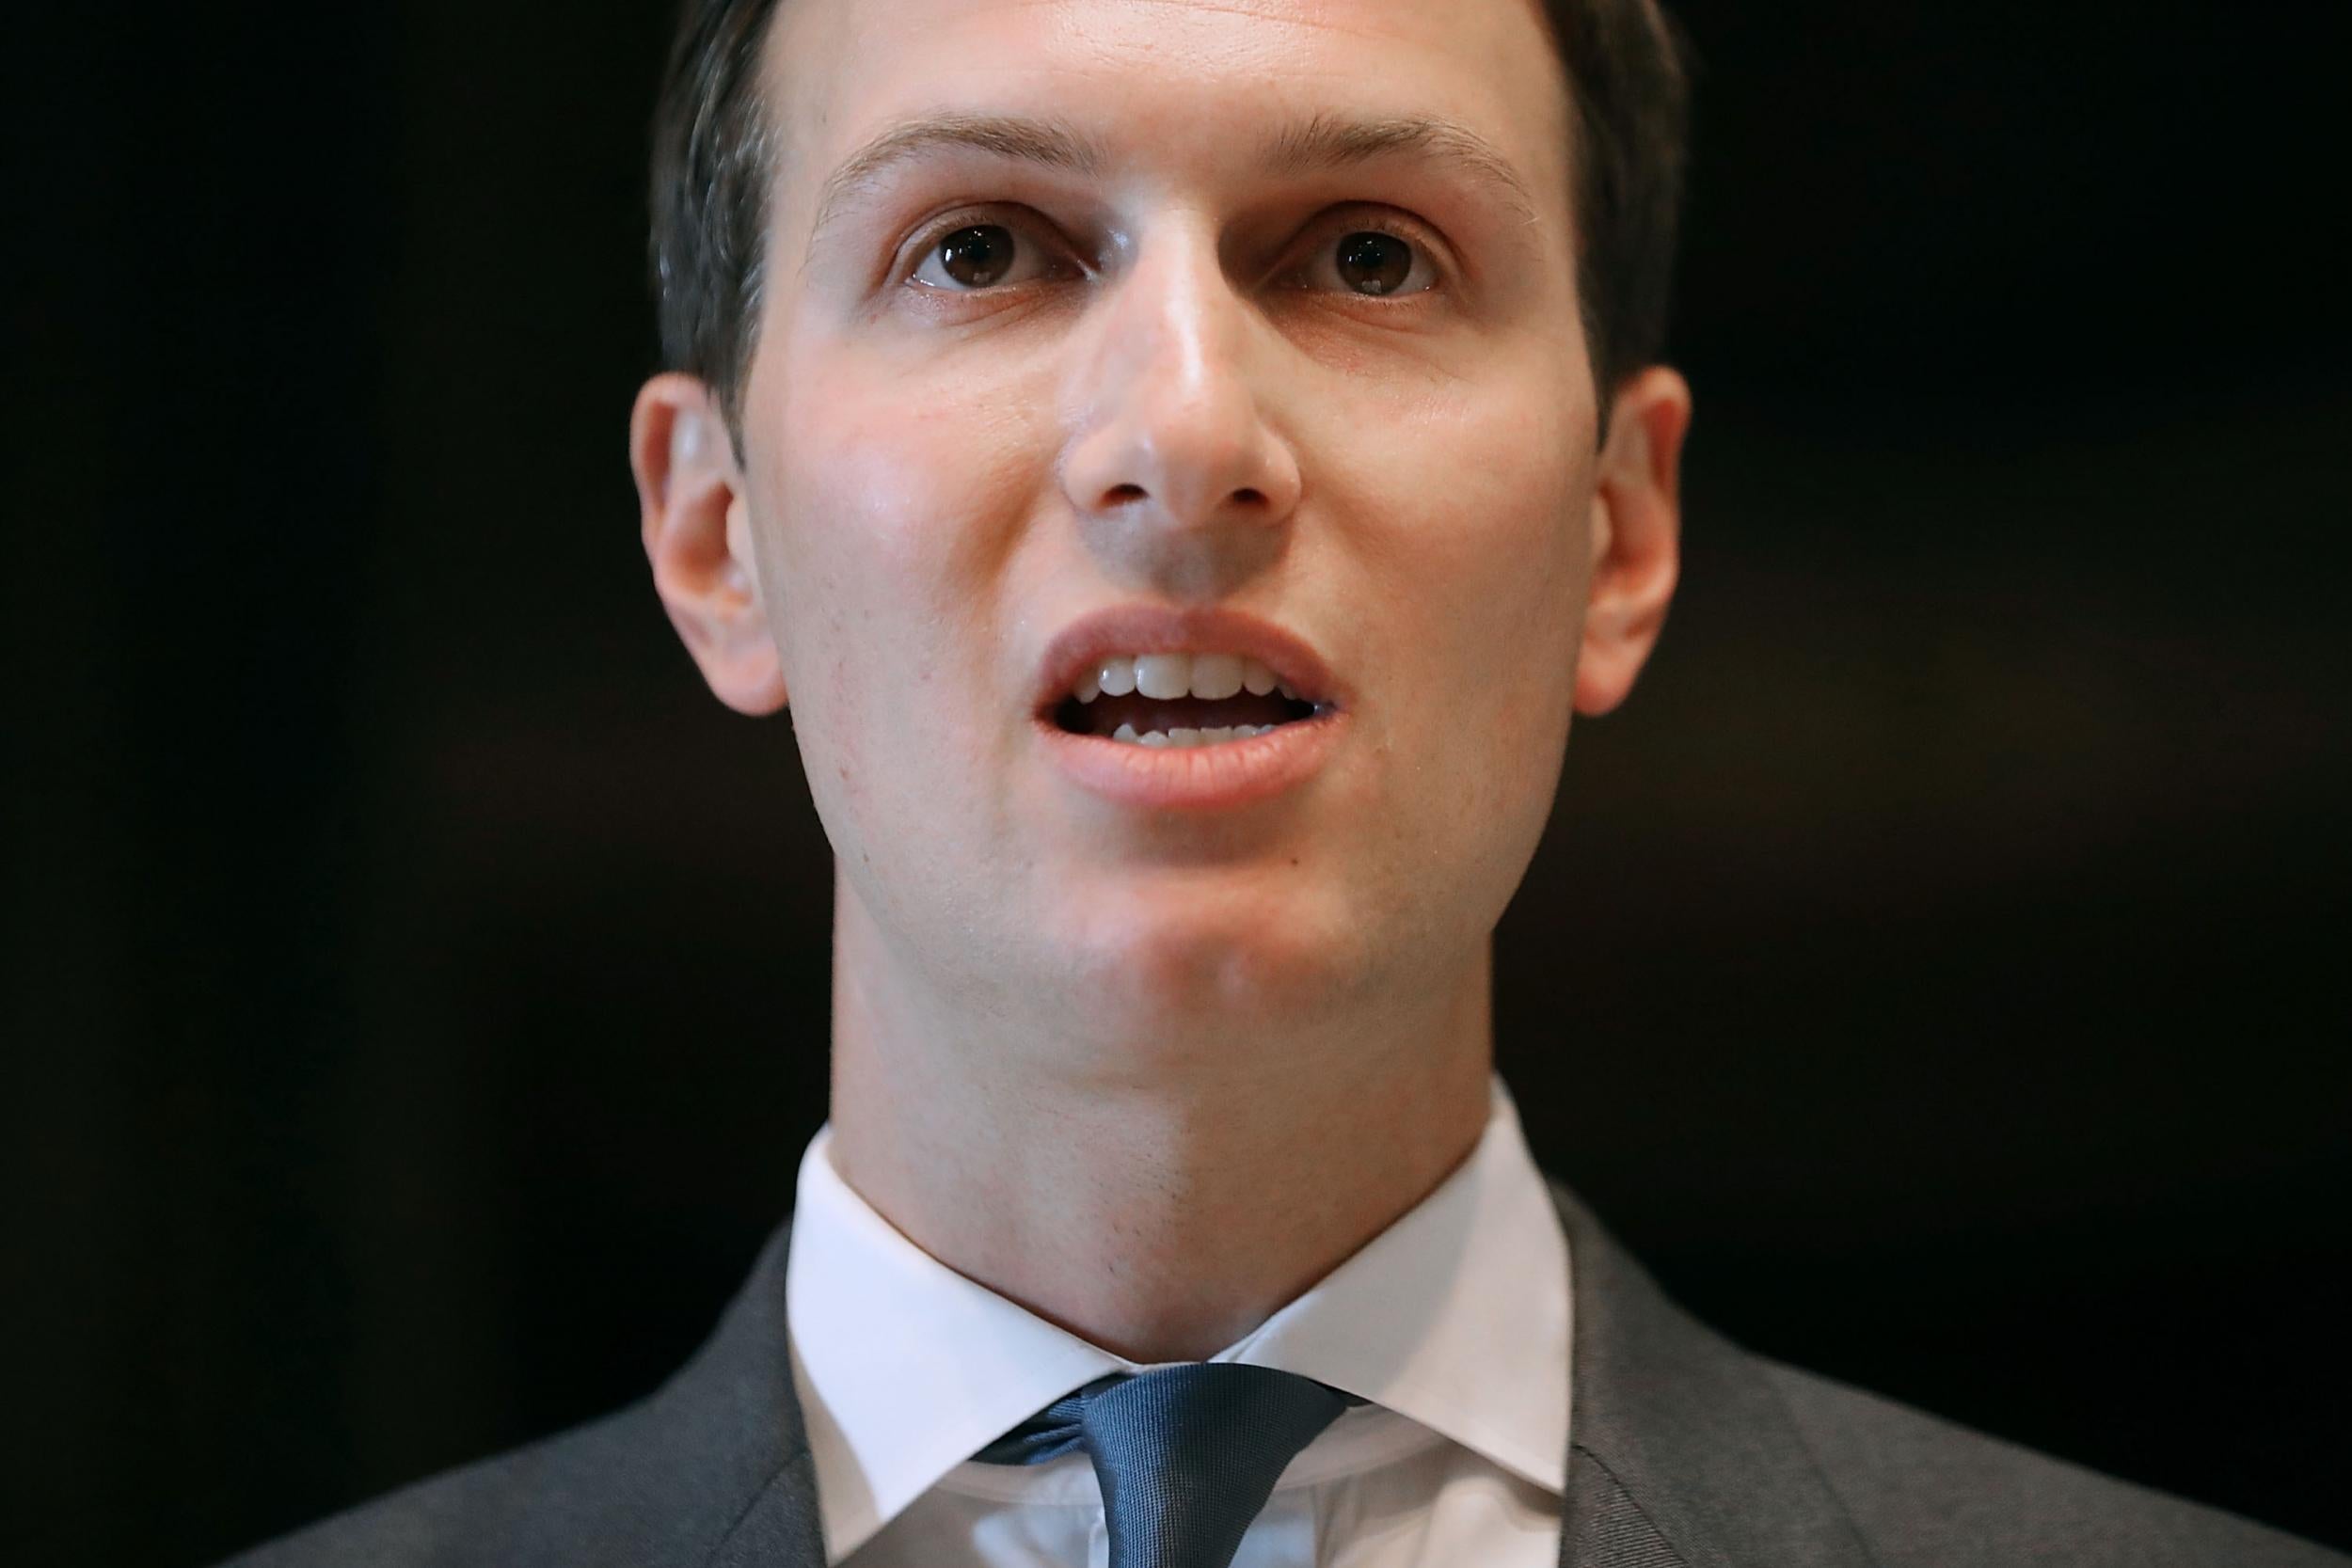 Senior White House adviser Jared Kushner, the president's son-in-law, is said to have sought funding from a Qatari billionaire